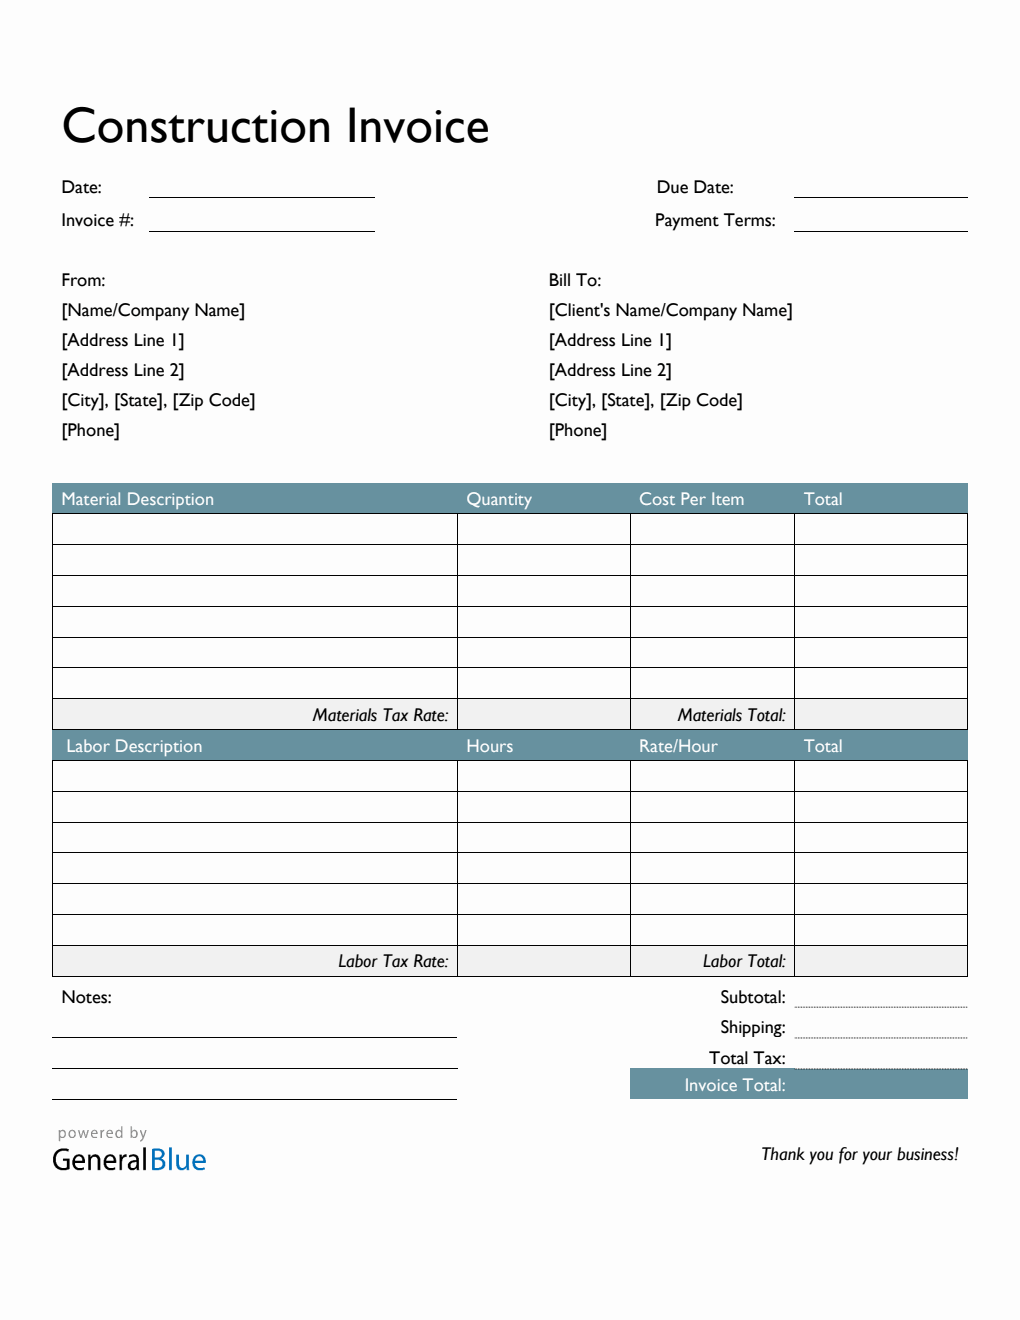 Construction Invoice Template in Word (Colorful)